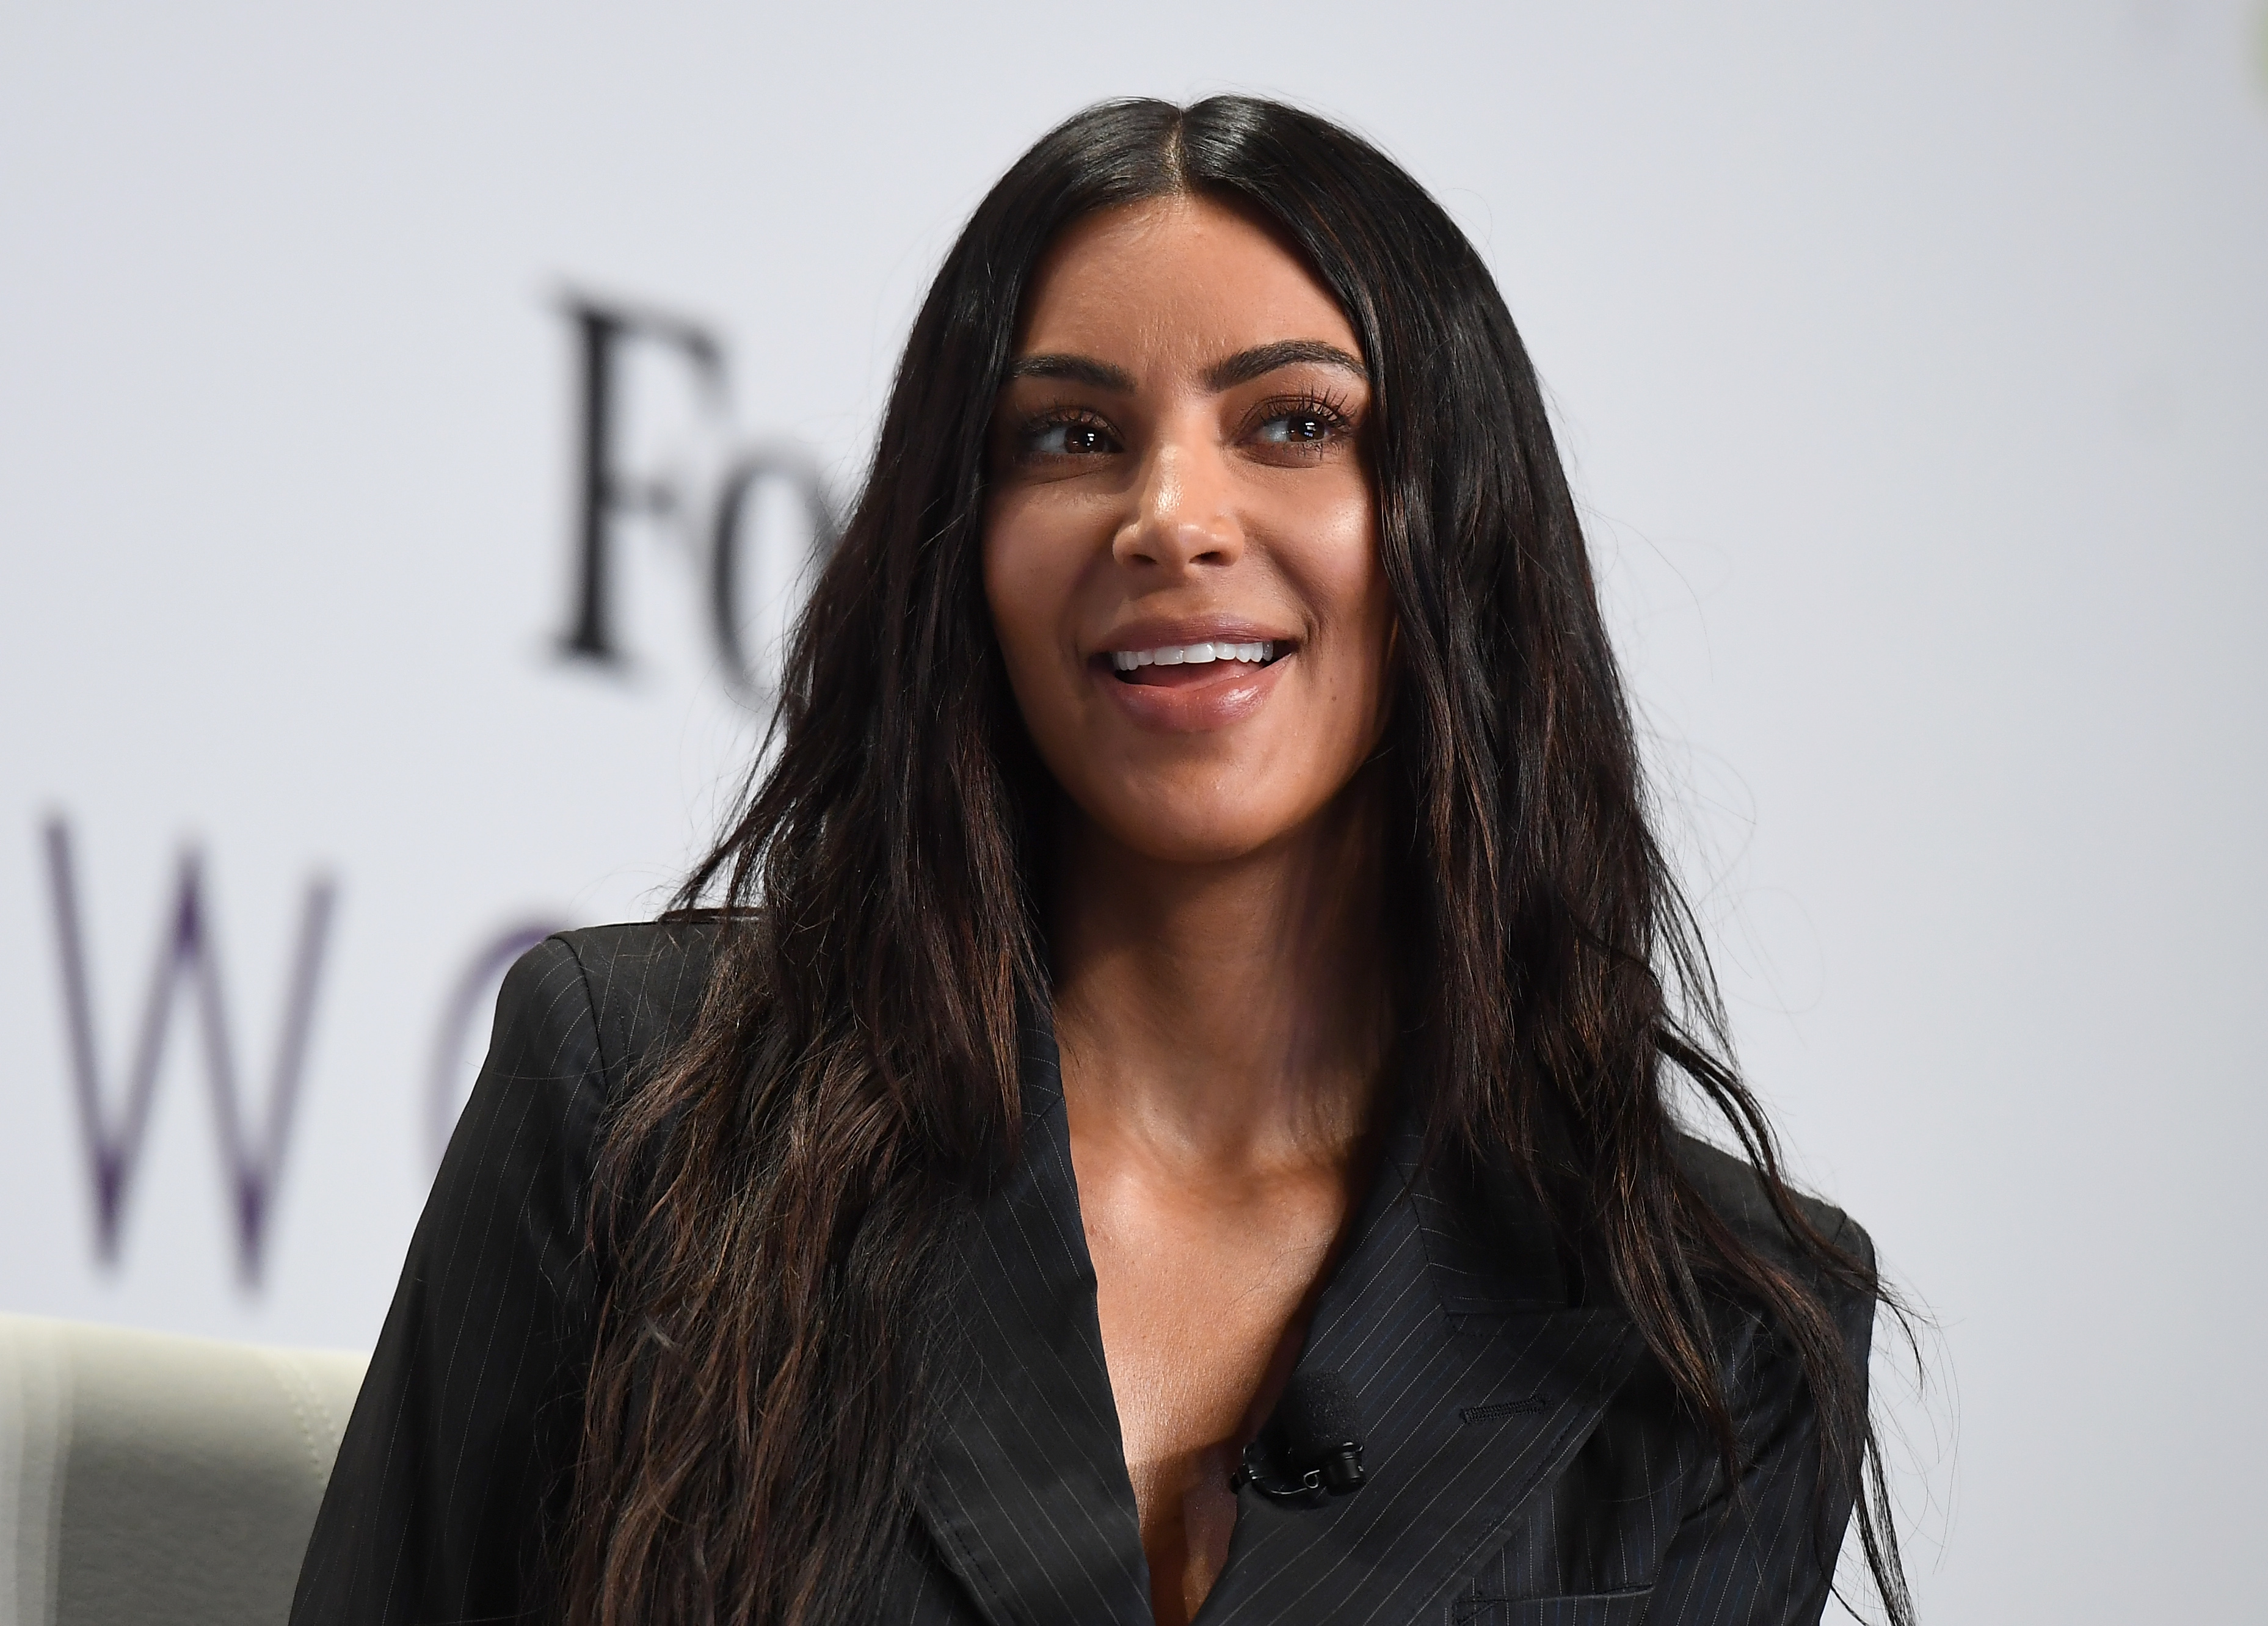 Kim Kardashian attends the 2017 Forbes Women's Summit at Spring Studios on June 13, 2017 in New York City. (ANGELA WEISS—AFP/Getty Images)